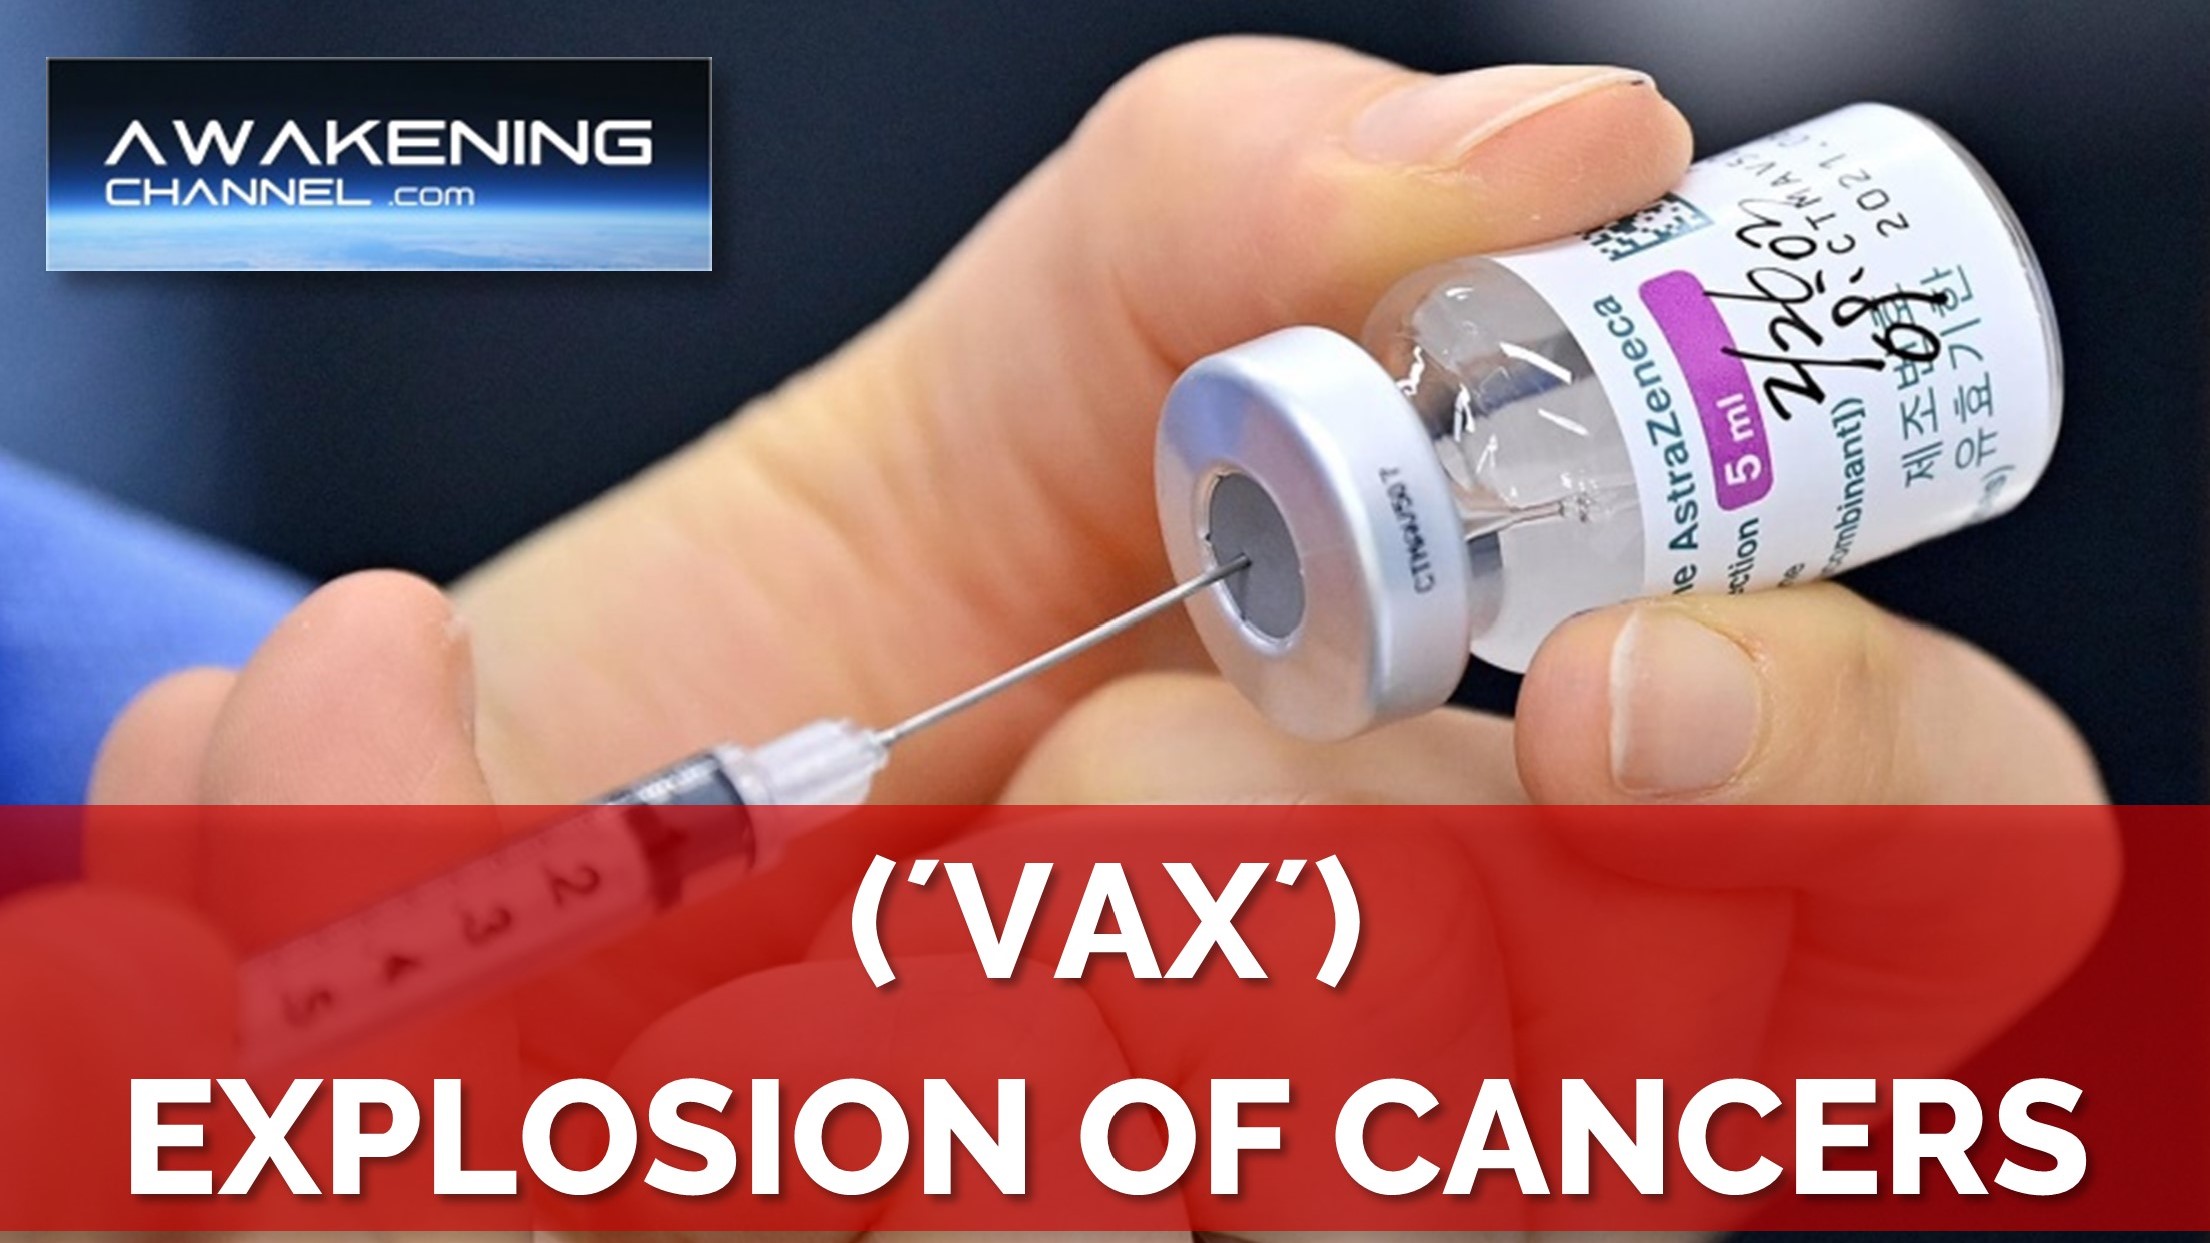 (“VAX”) EXPLOSION OF CANCERS